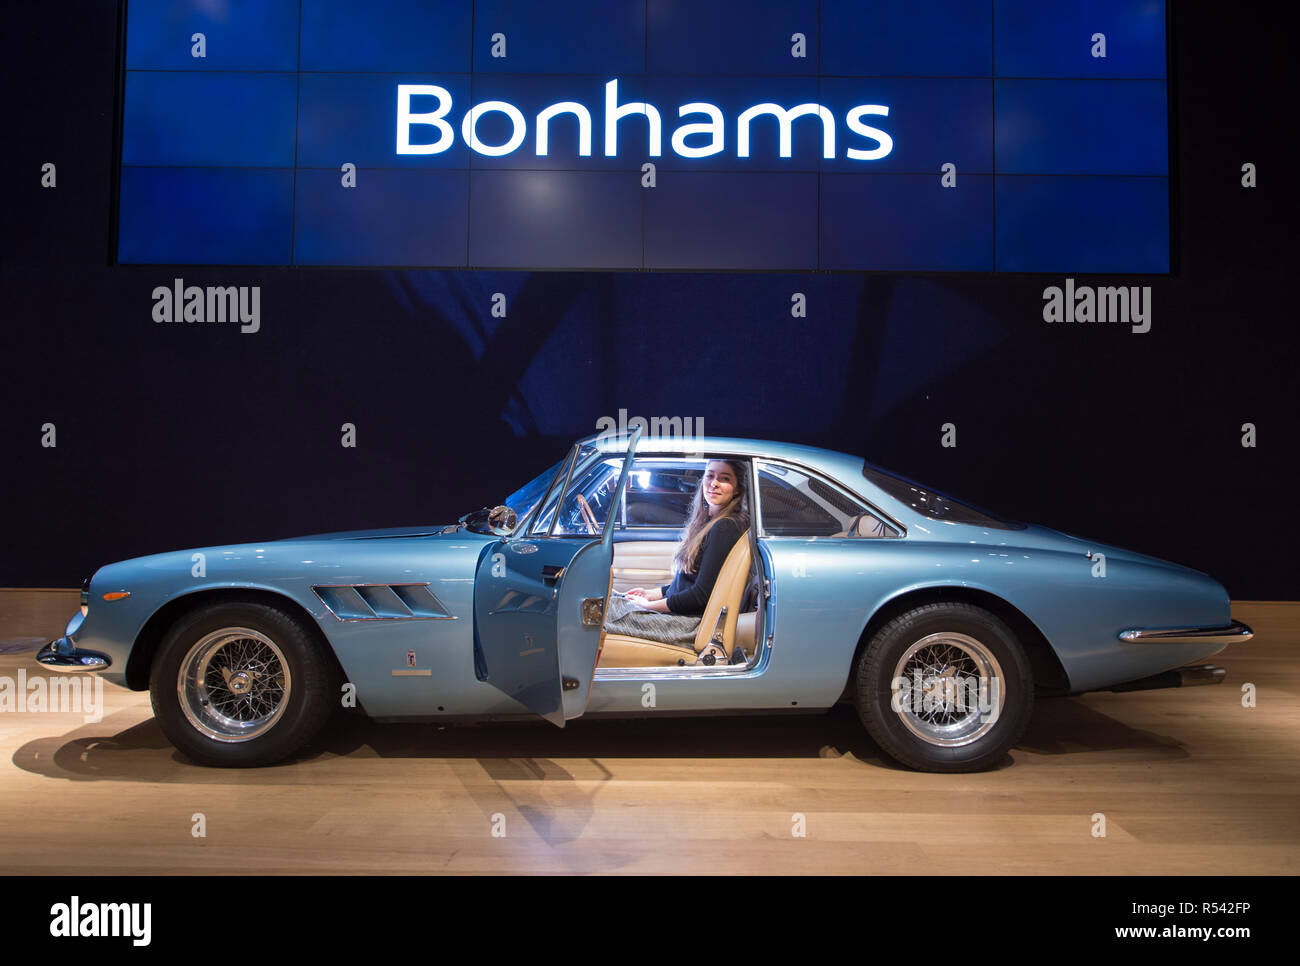 Bonhams, New Bond Street, London, UK. 29 November 2018. Historic Jaguar racing cars arrive at Bonhams in central London alongside other high-performance racing cars and exceptional road cars. Highlights include a Le Mans class-winning Jaguar XJ220C driven by David Coulthard (£2,200,000-2,800,000), Lister Jaguar Knobbly (£2,200,000-2,800,000). The sale takes place on 1st December 2018. Image: 1966 Ferrari 500 Superfast Series II Coupé, estimate £1,300,000-1,400,000. Credit: Malcolm Park/Alamy Live News. Stock Photo